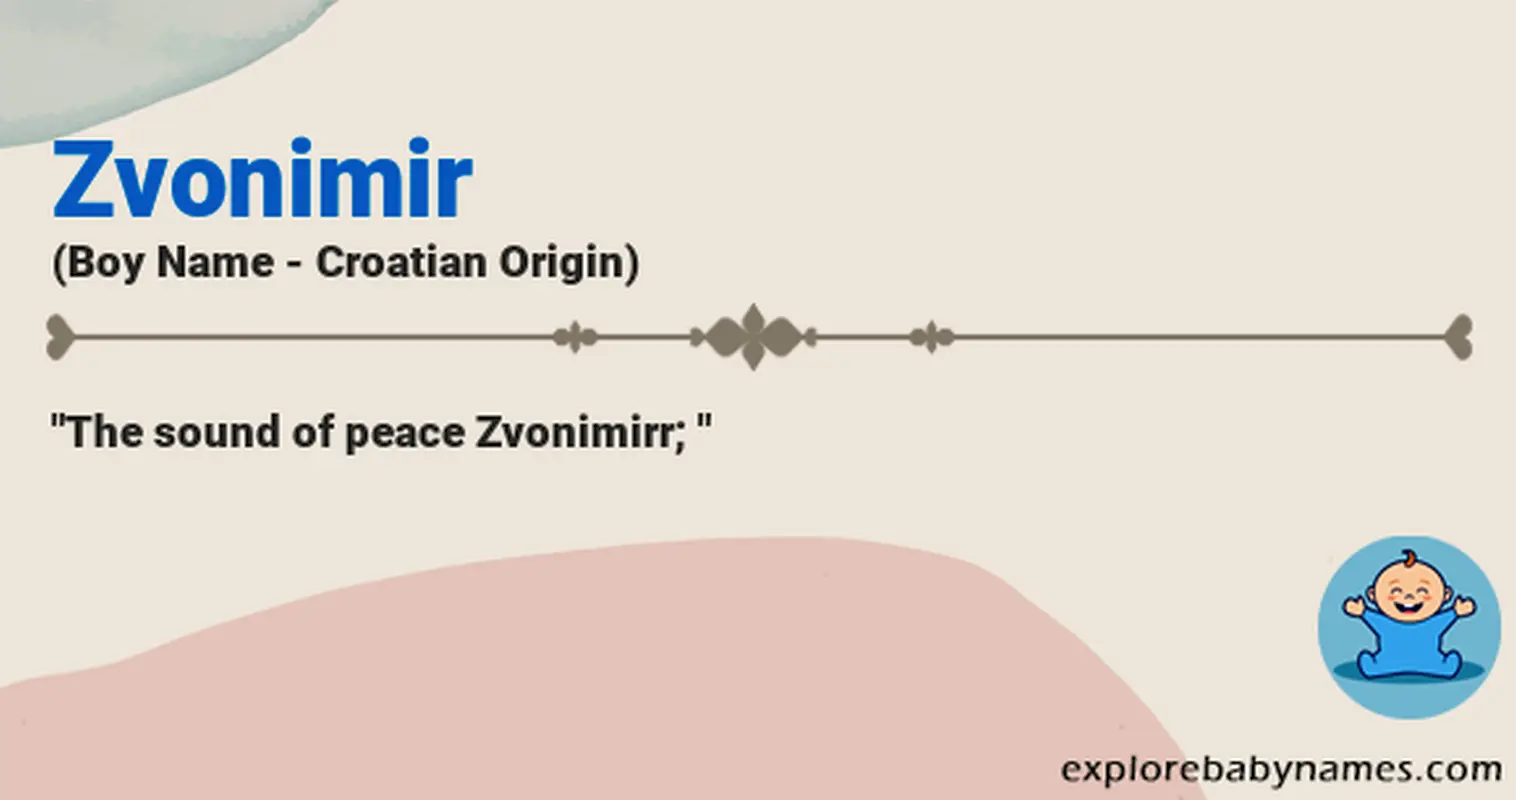 Meaning of Zvonimir